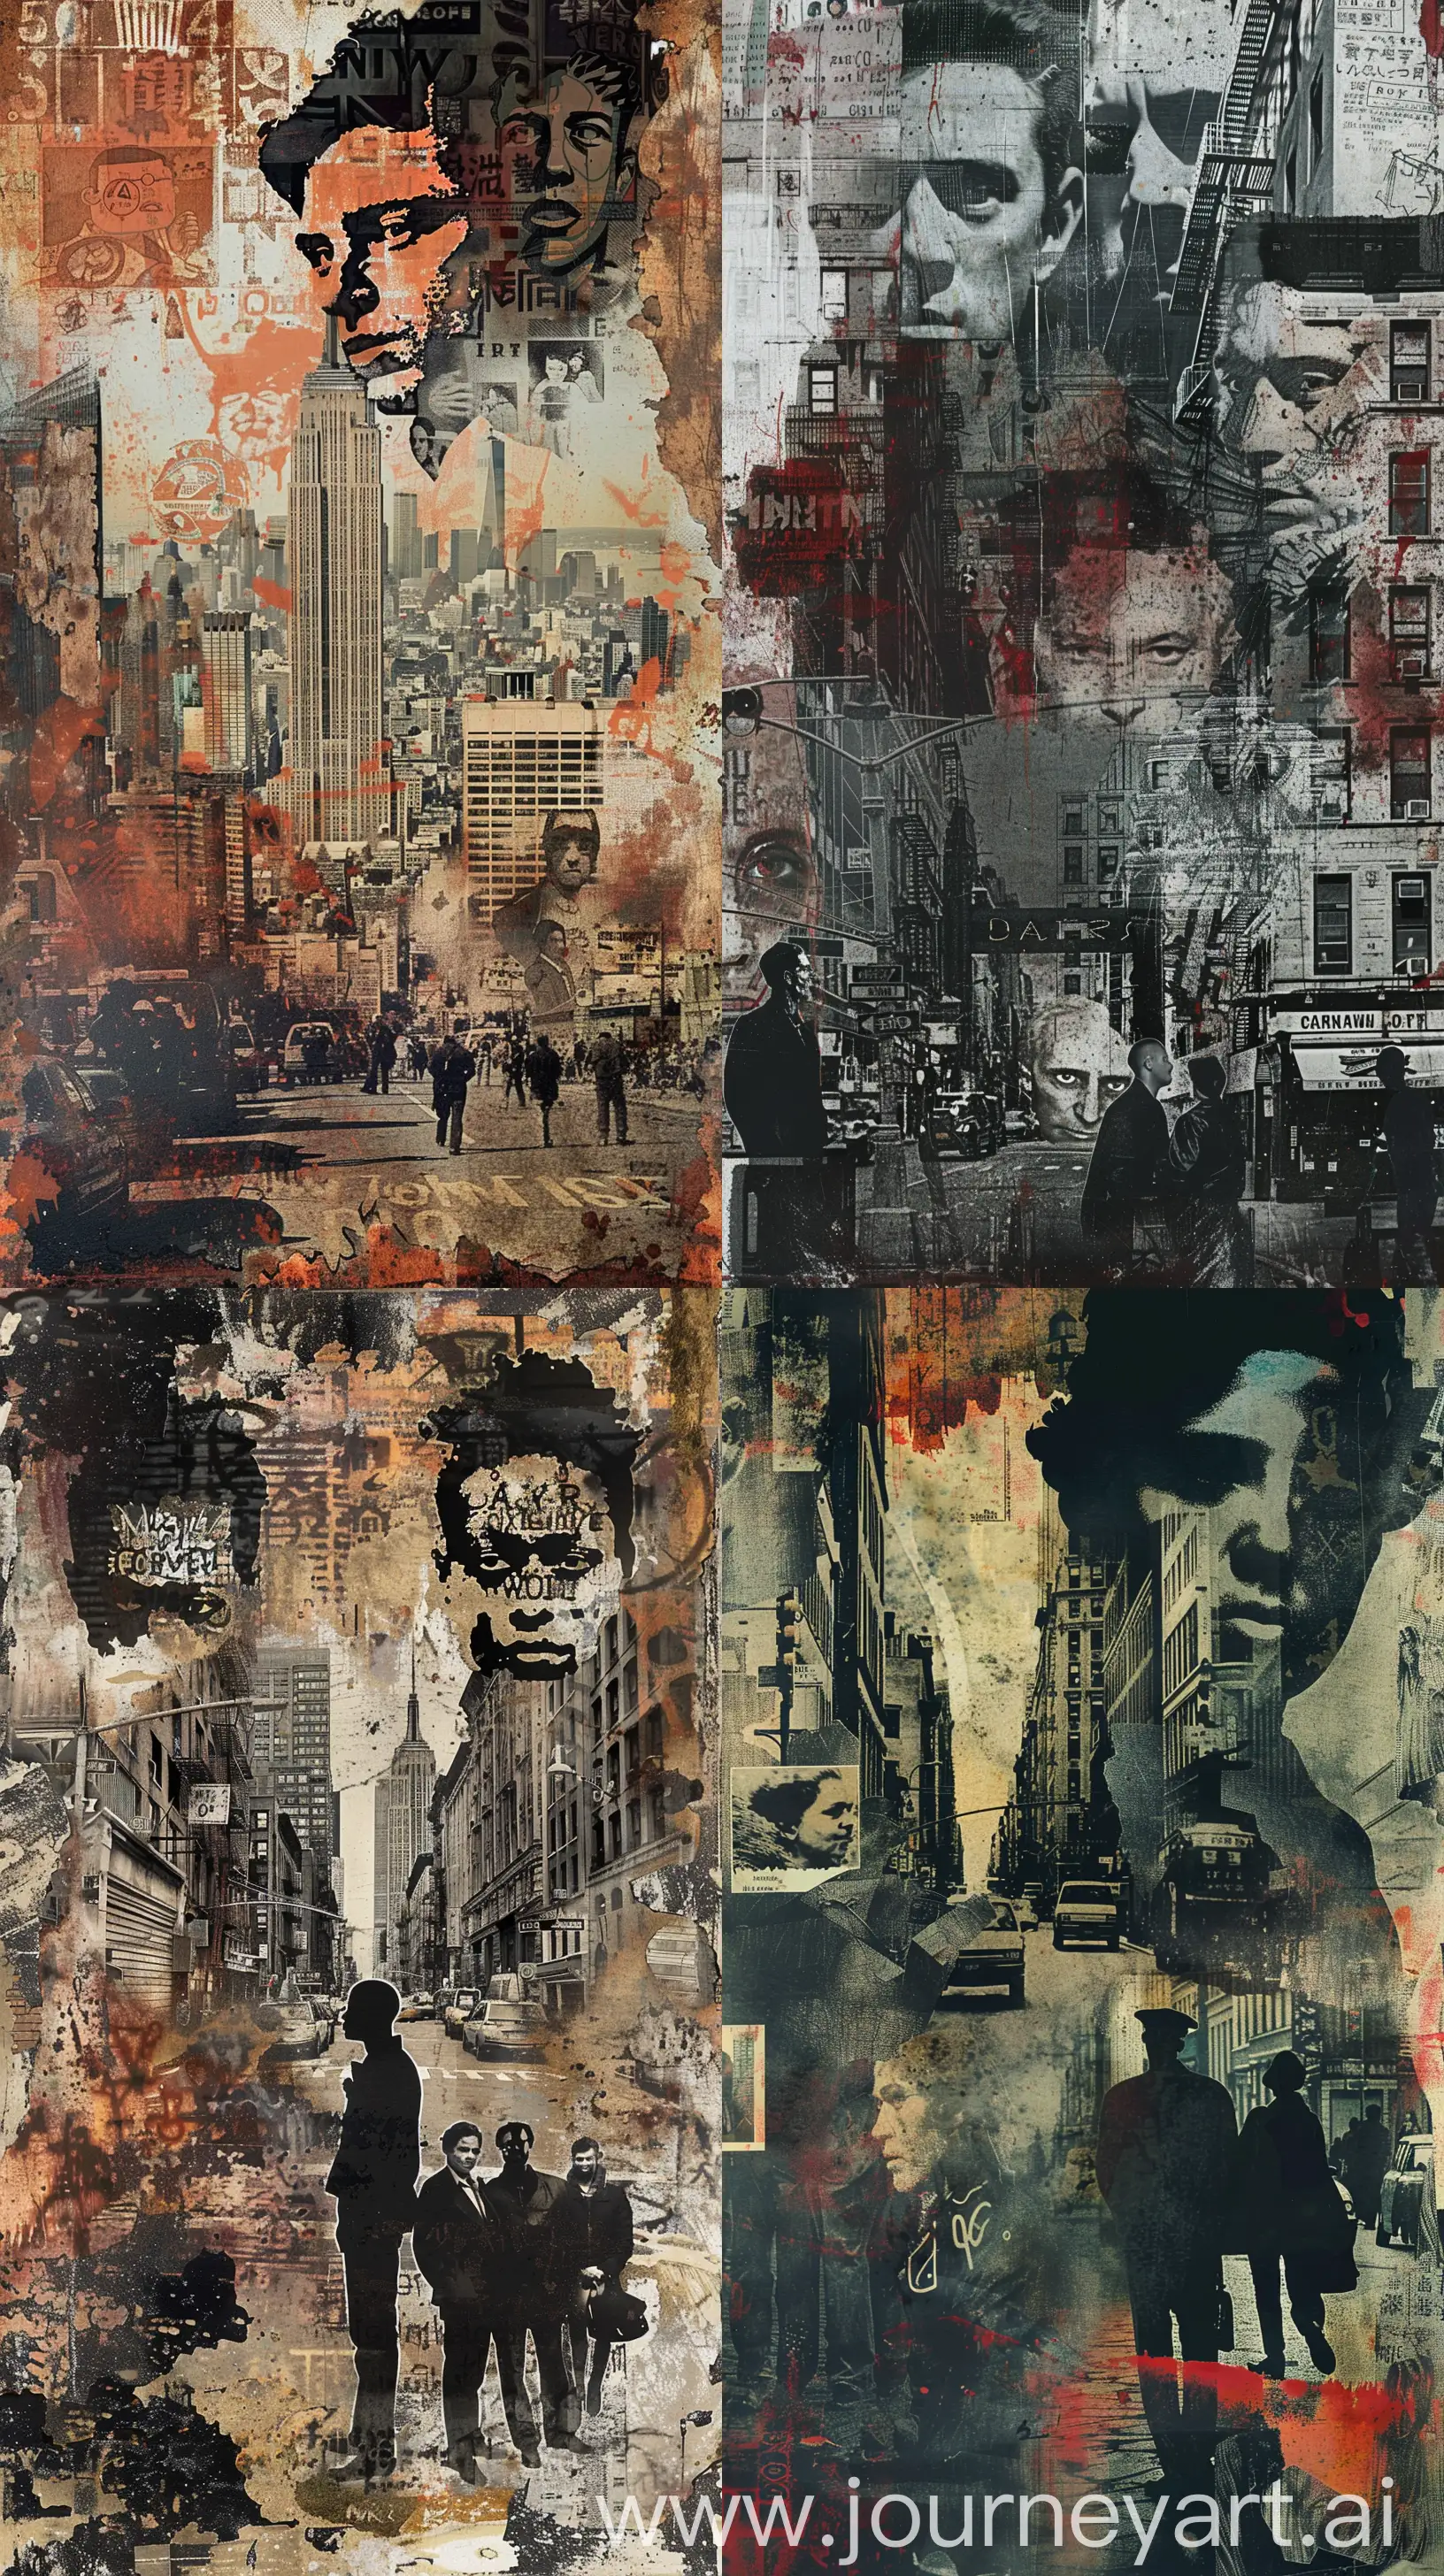 Imagine a phone wallpaper that reflects the provocative and poignant style of David Wojnarowicz, depicting an urban landscape overlaid with a collage of historical and personal imagery. Use a gritty, textured background to represent the streets of New York, with stenciled figures and faces that speak to the struggles and stories of the city's inhabitants. The composition, rich with Wojnarowicz's symbolic language, should capture a sense of urgency and raw emotion, making for a powerful and creative statement on your device.` --ar 9:16